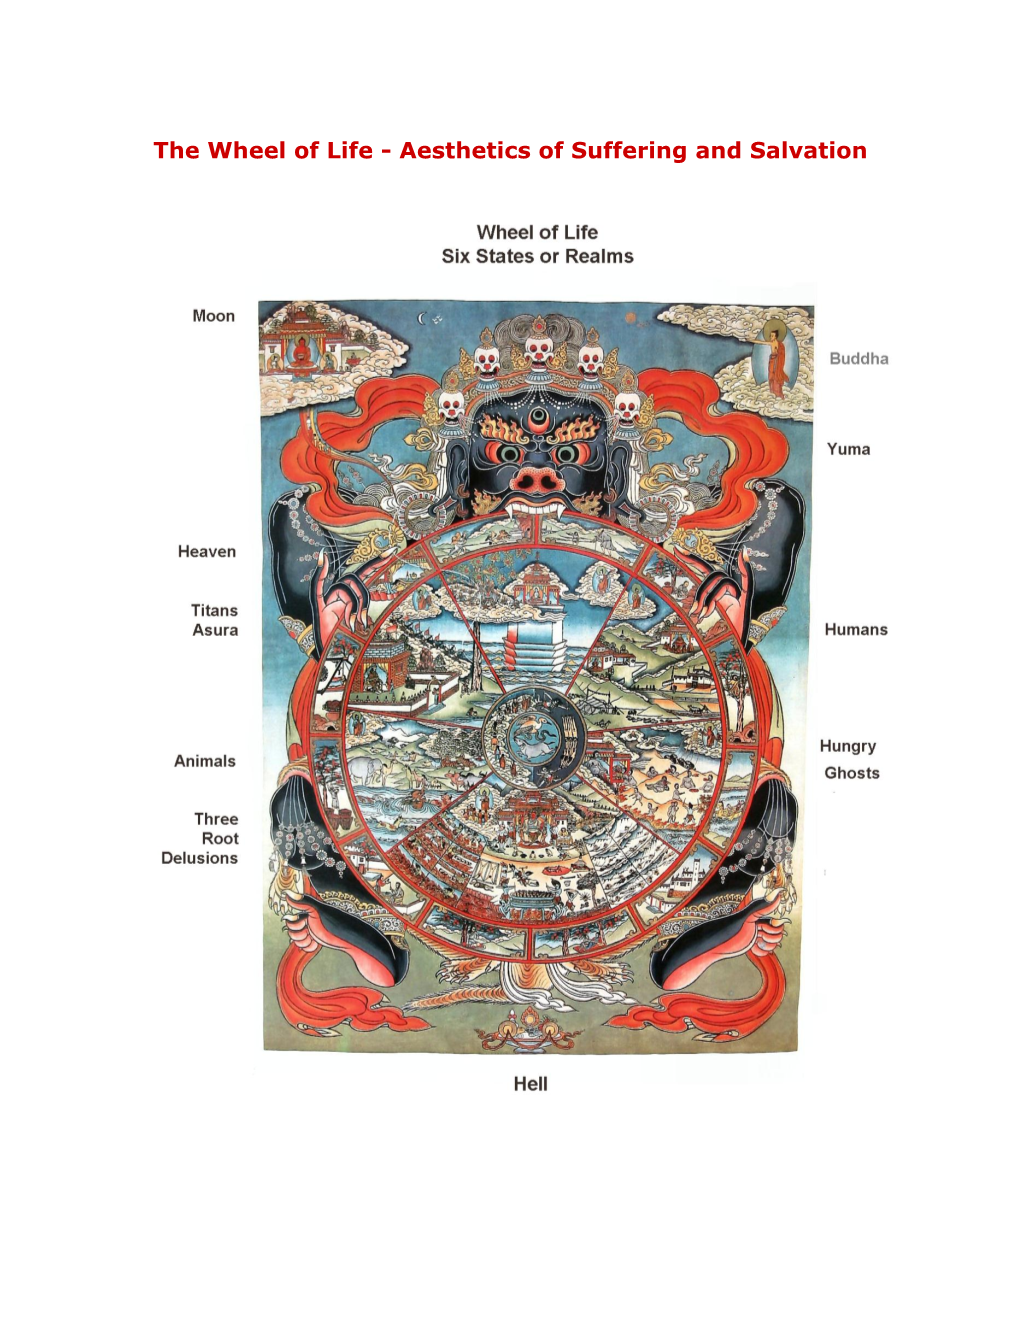 The Wheel of Life - Aesthetics of Suffering and Salvation